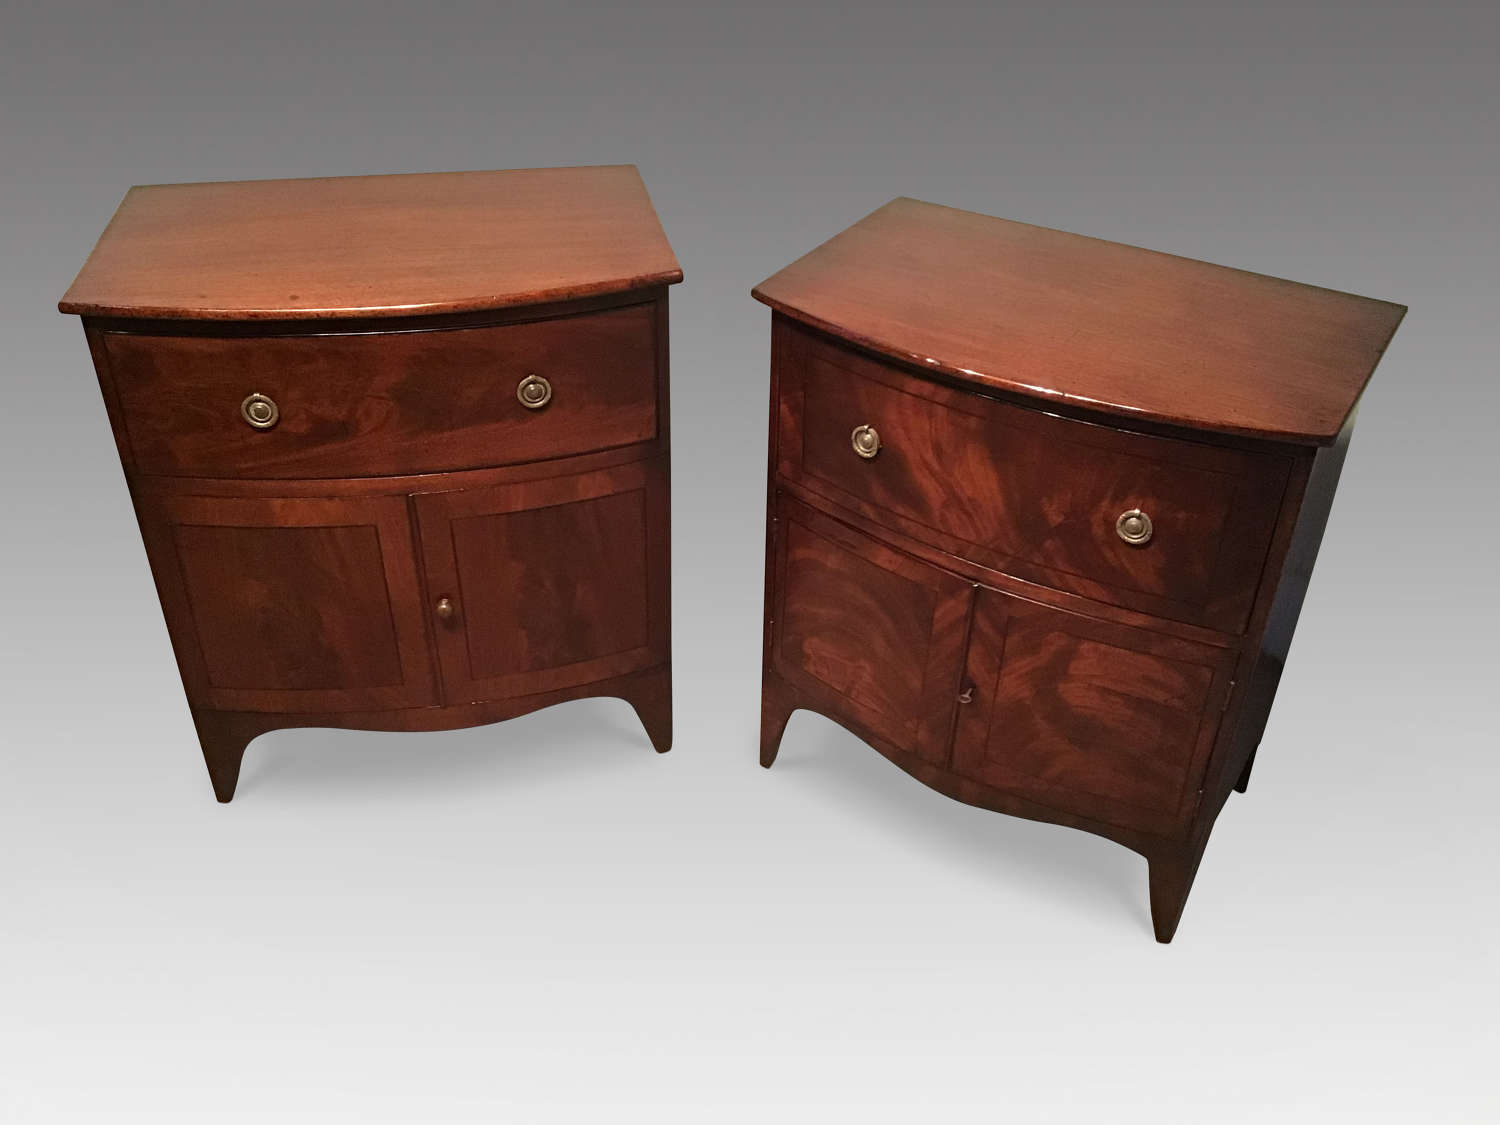 Matched pair antique bedside commodes